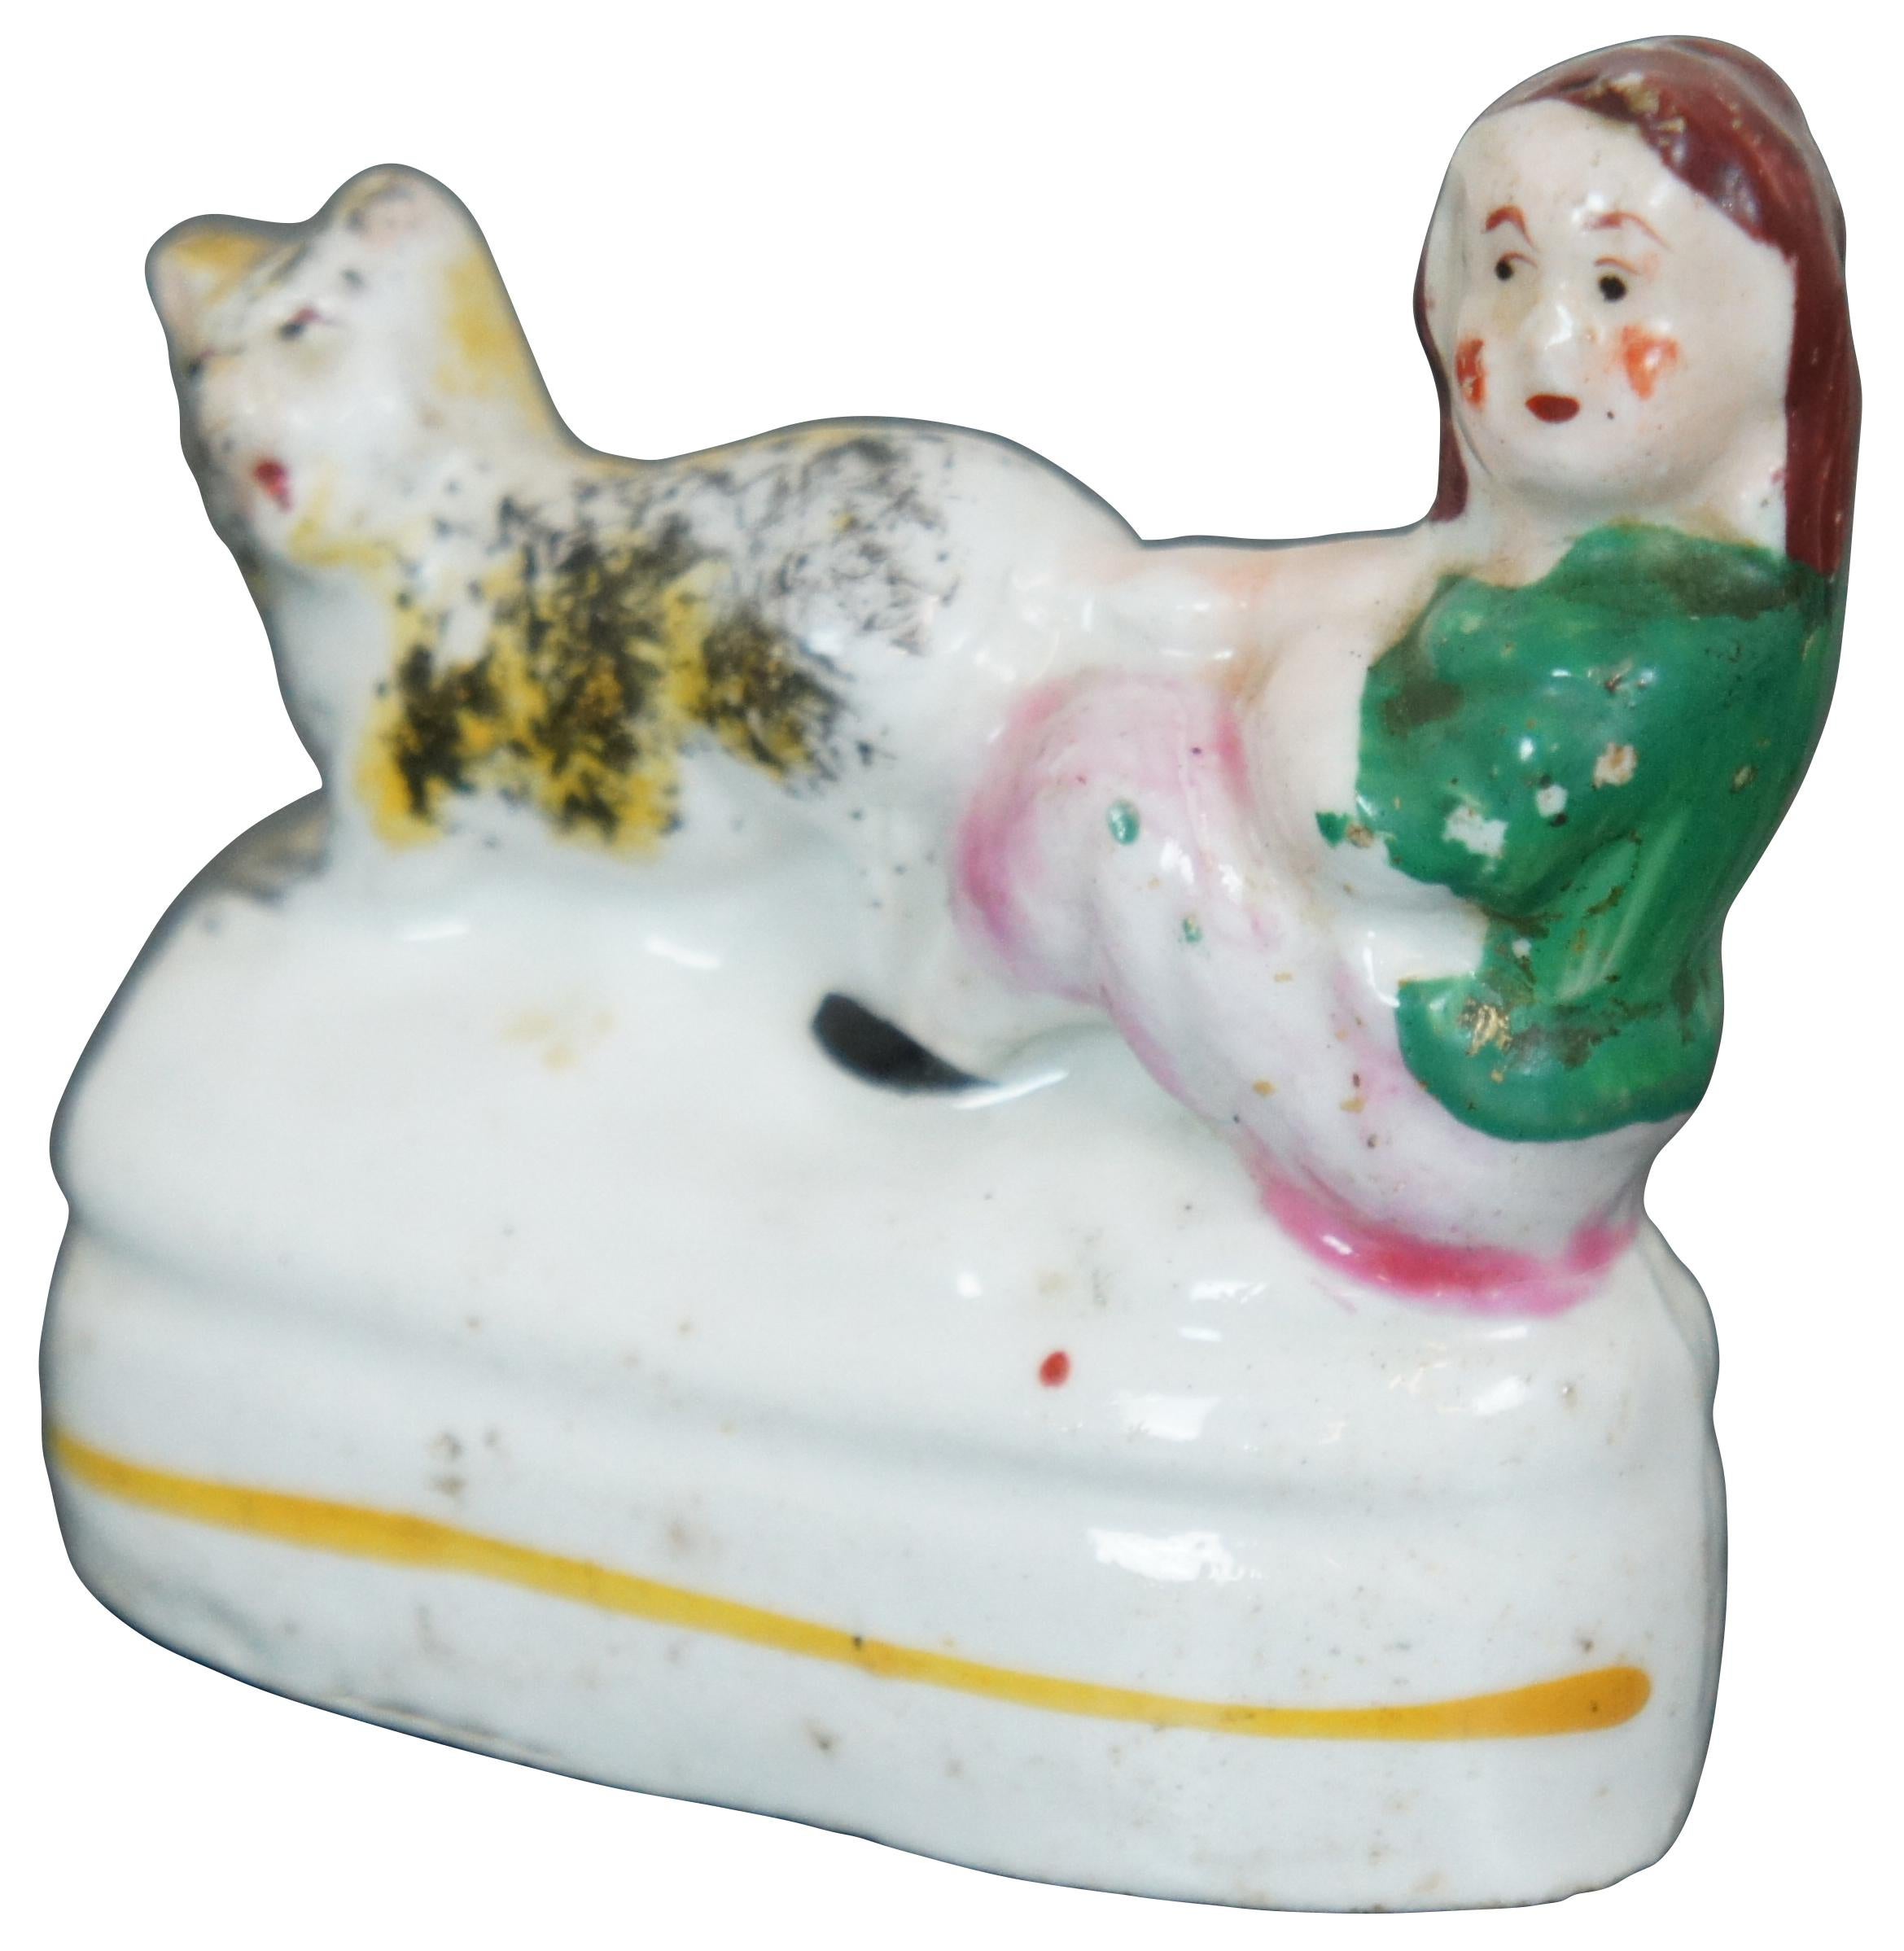 Antique 19th century miniature porcelain figurine in the shape of a child pulling a cat’s tail.